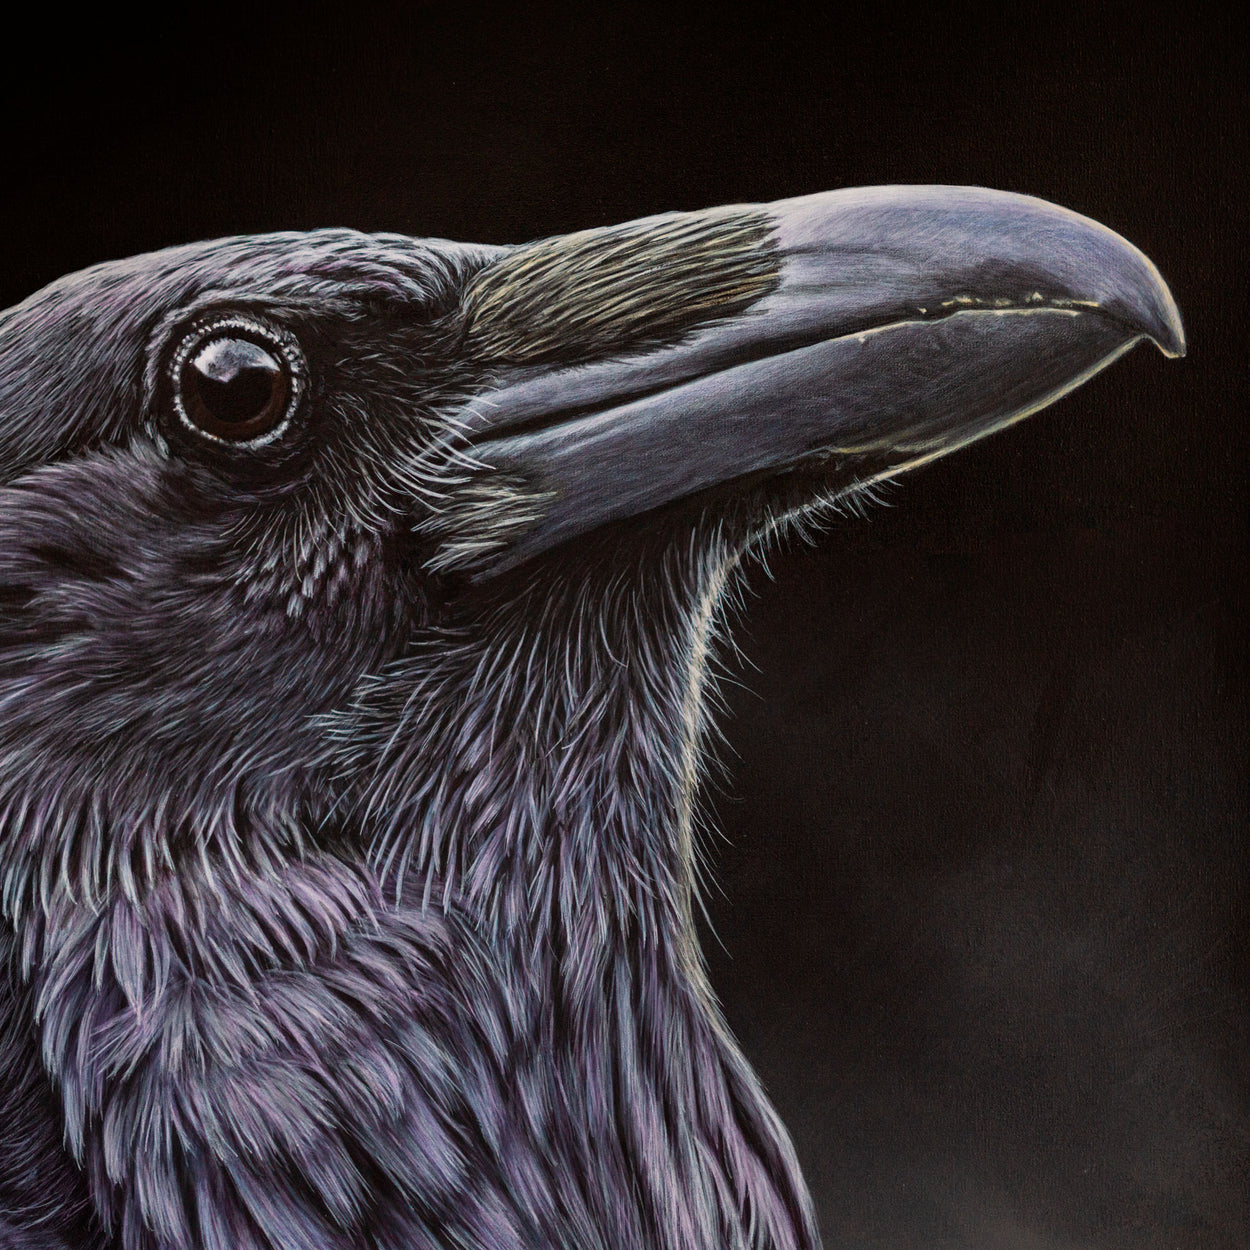 Raven painting close-up 1